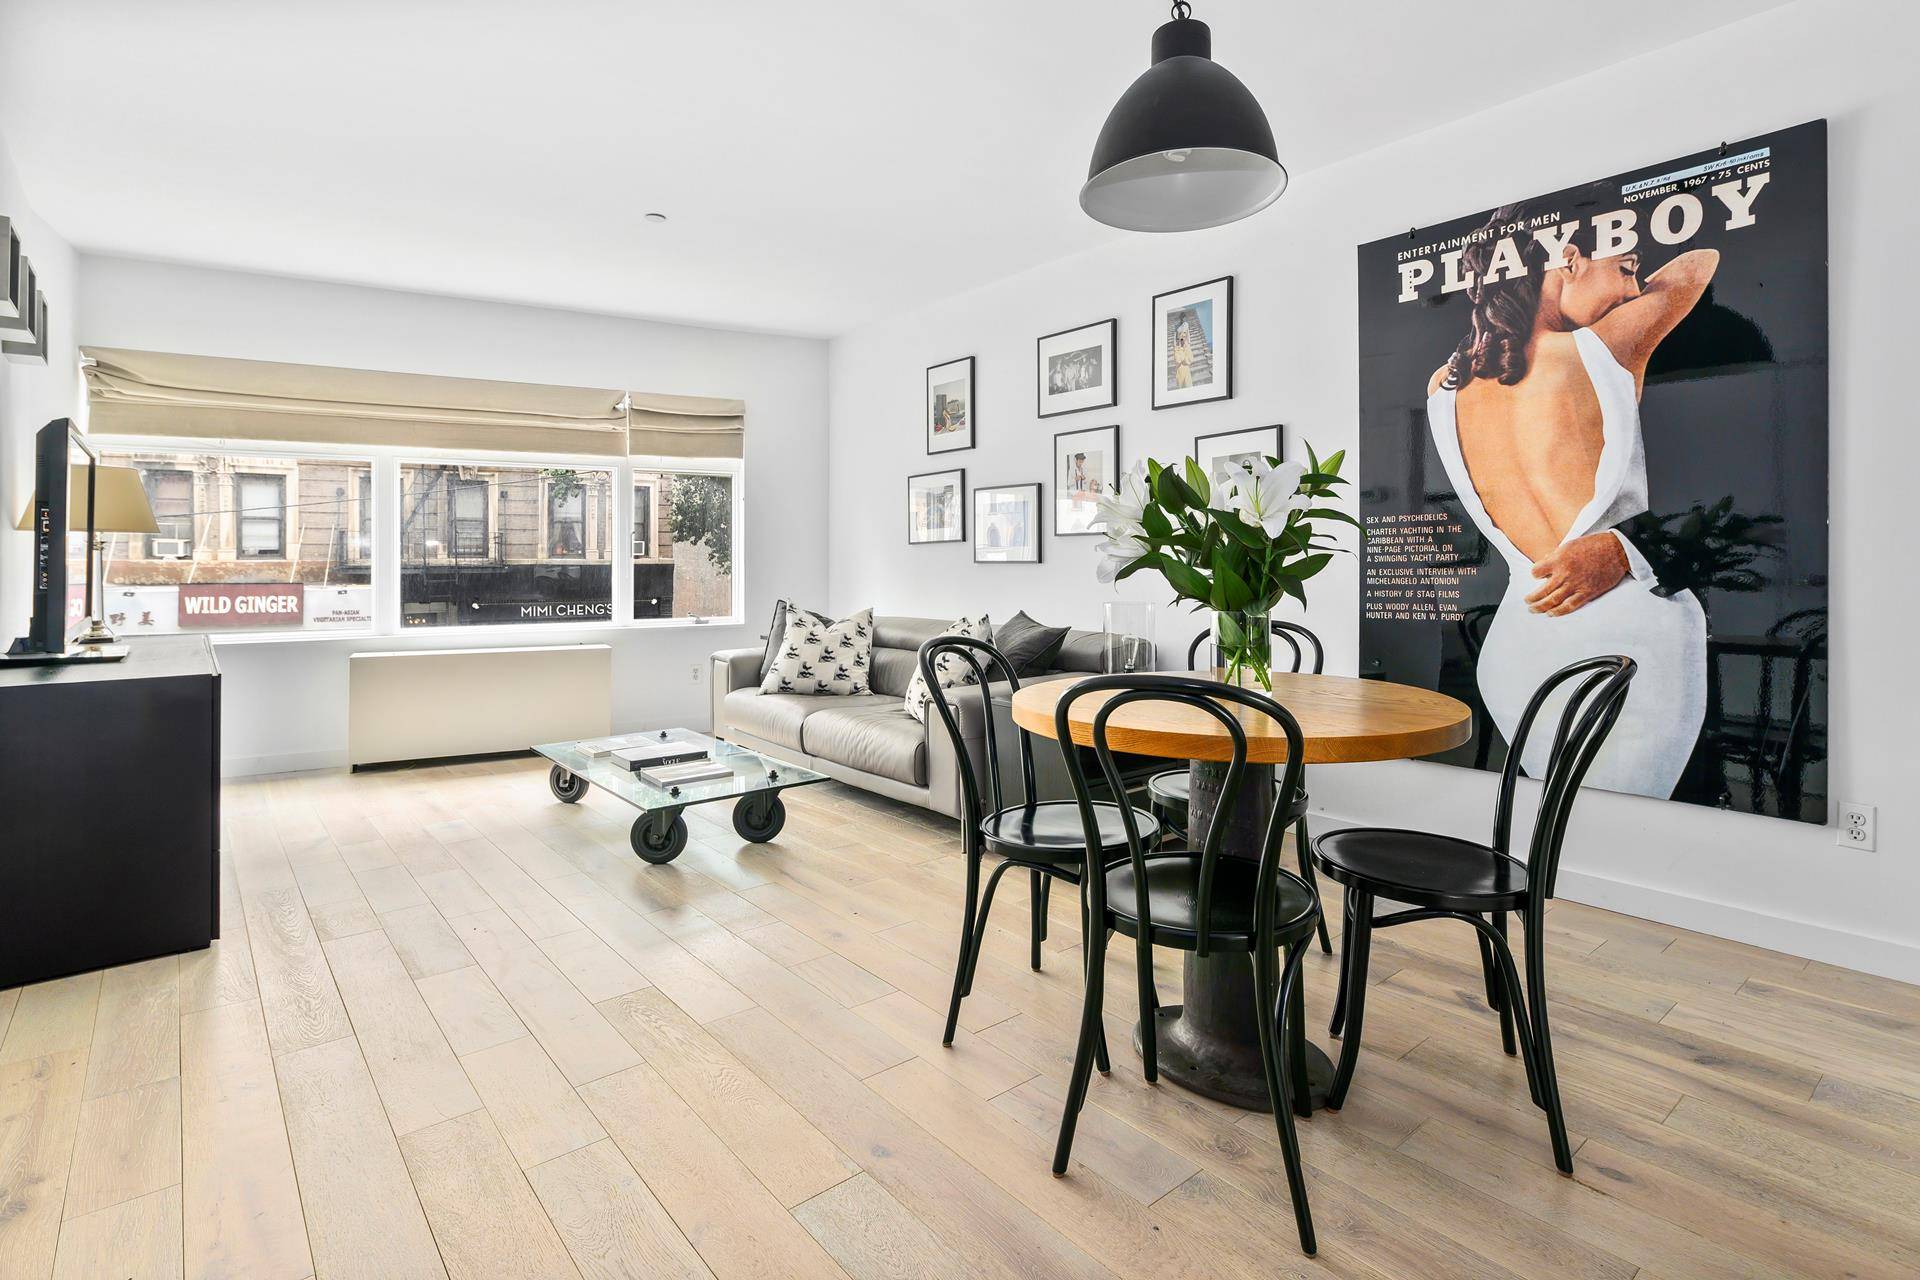 Bright one bedroom Condo in Nolita with low monthly common charges rarely available for sale.